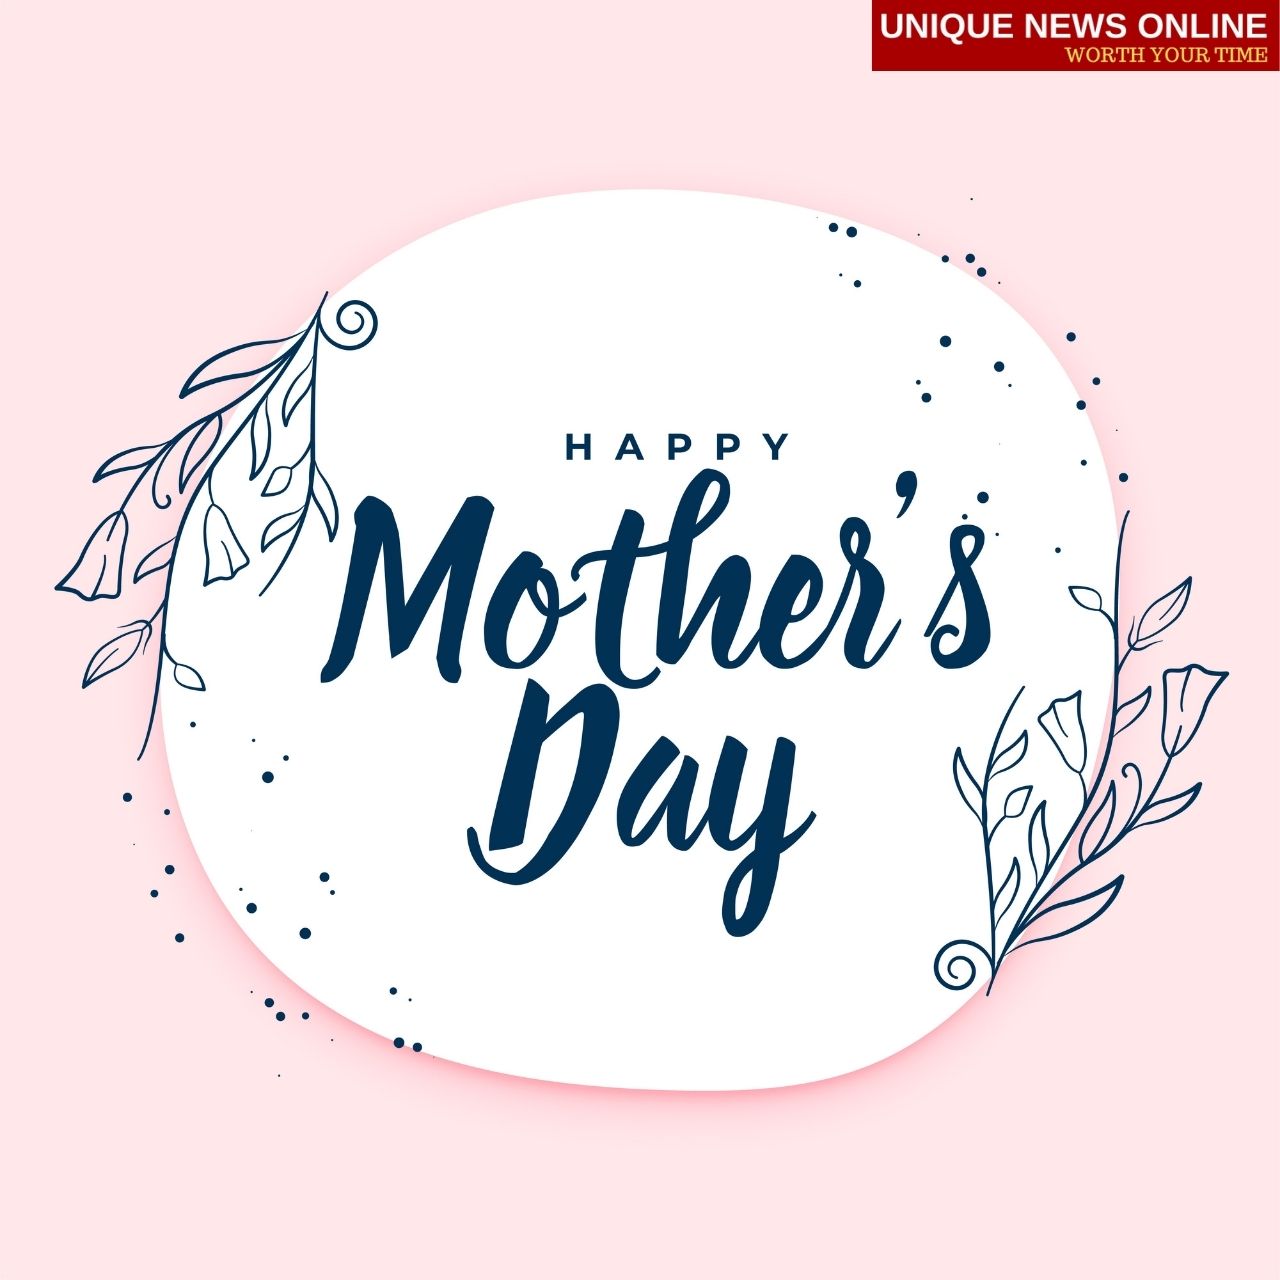 Happy Mother's Day 2021 Wishes, Wallpapers, Images (Photos), WhatsApp Status, Greetings, Messages, Quotes, and Drawing to share with Mom